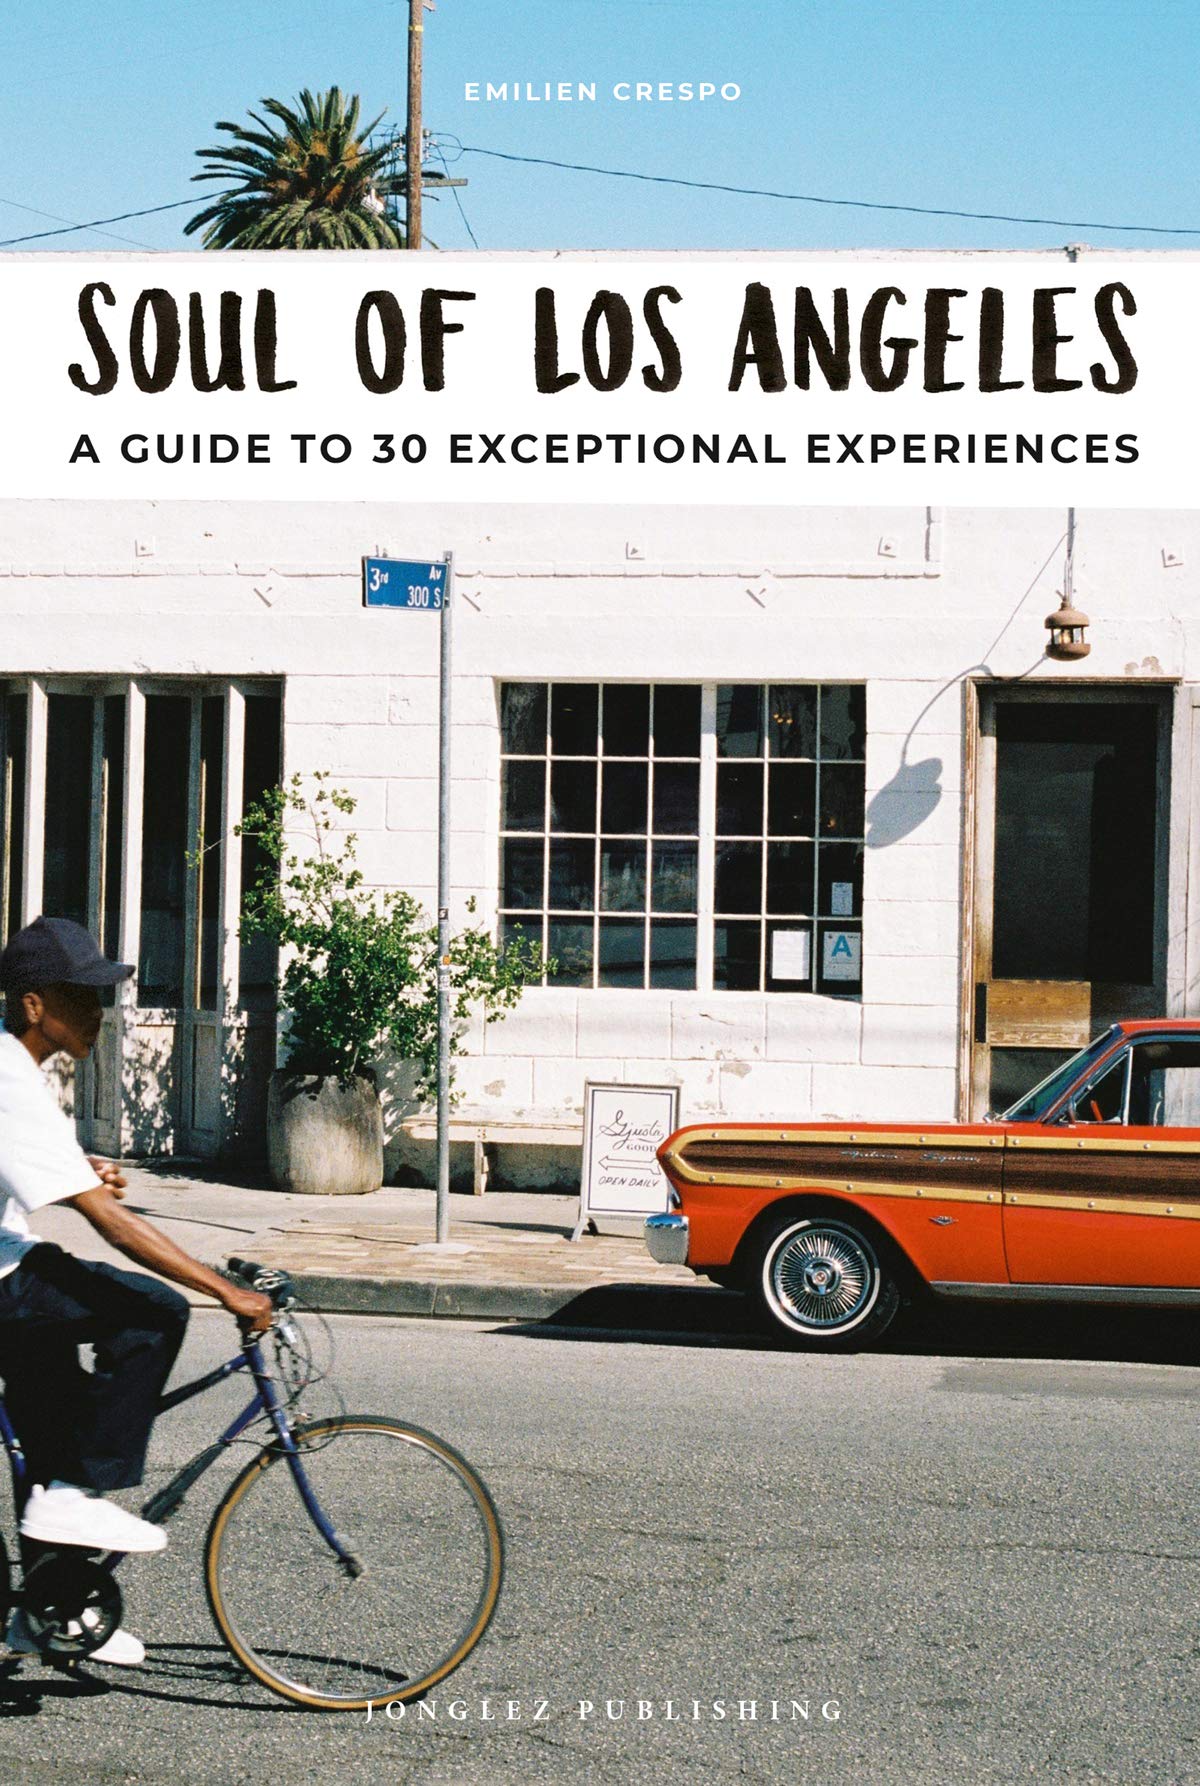 Soul of Los Angeles: A Guide to 30 Exceptional Experiences